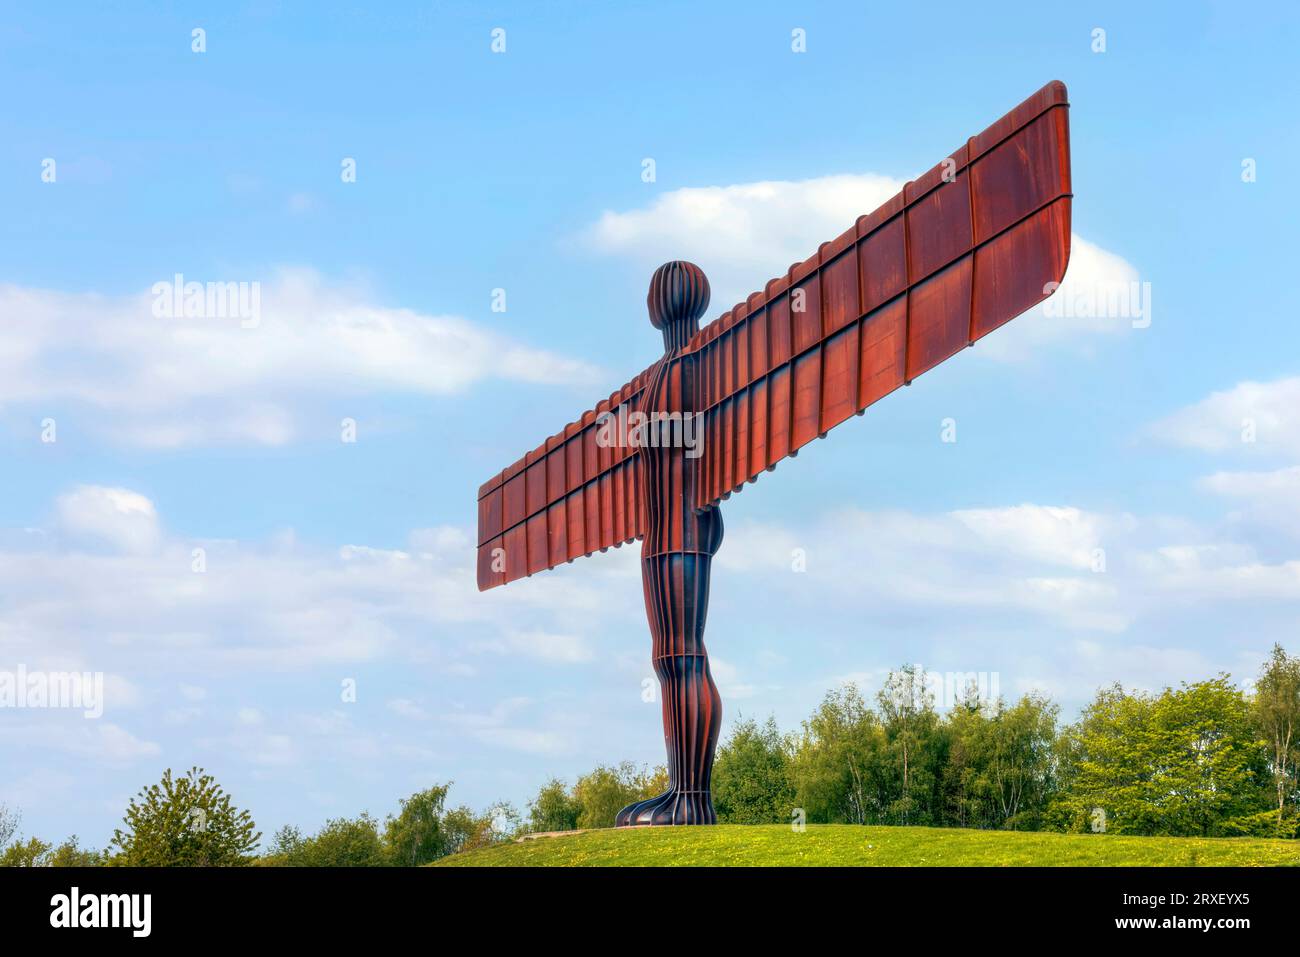 The largest Angel sculpture of the world: Angel of the North in Tyne and Wear, England, United Kingdom Stock Photo